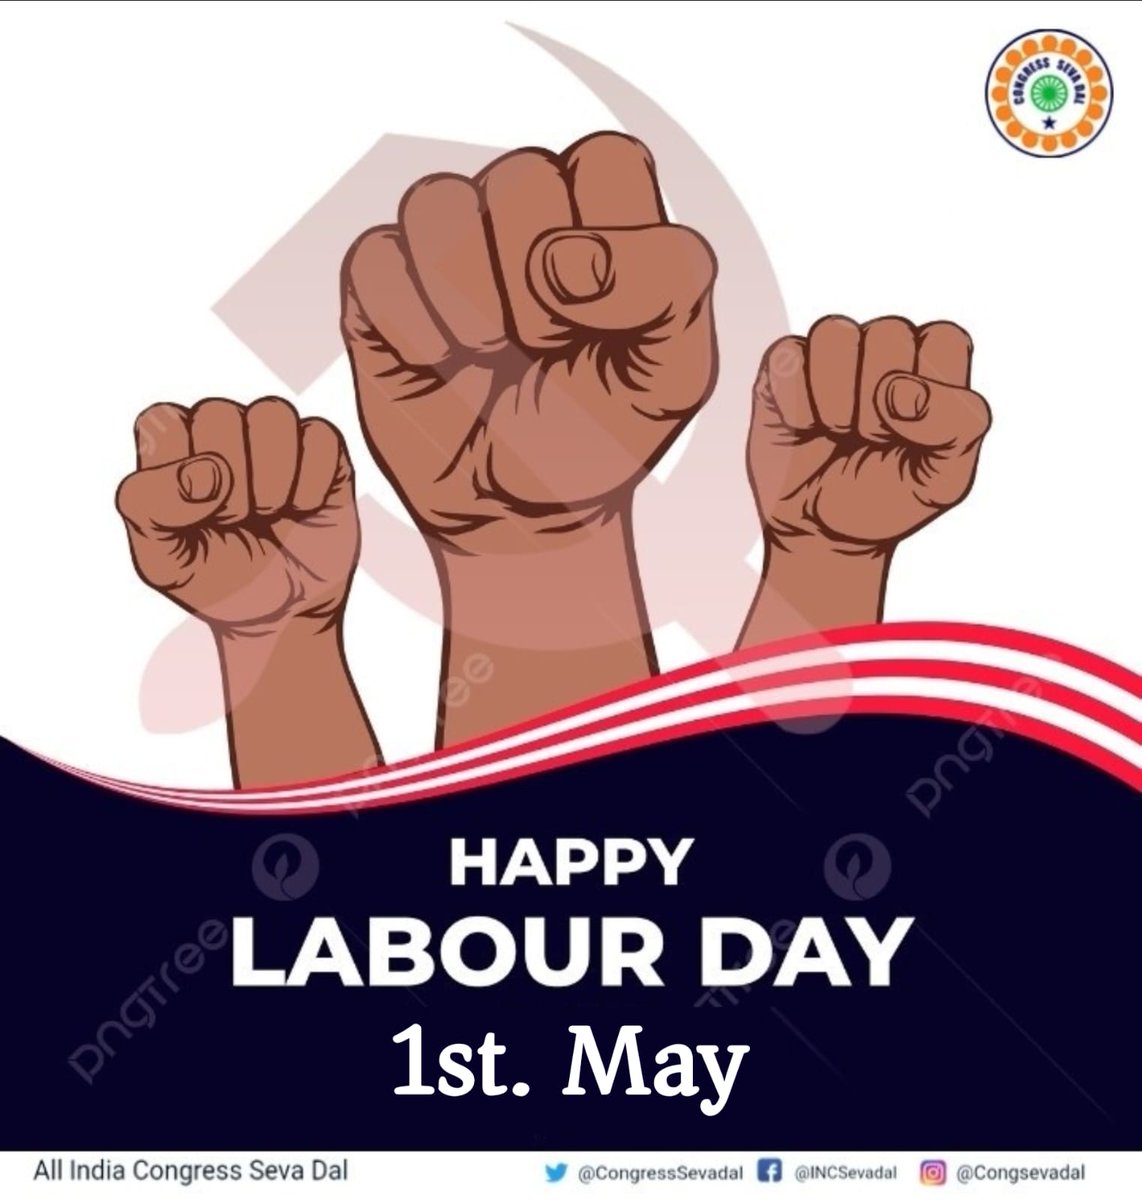 Best wishes to the workers and labourers on the occasion of International Labour Day. To eradicate poverty, the Congress brought the MGNREGA scheme,making the RIGHT TO WORK a reality. Today,we are working towards providing fair justice to labourers under the scheme Shramik NYAY